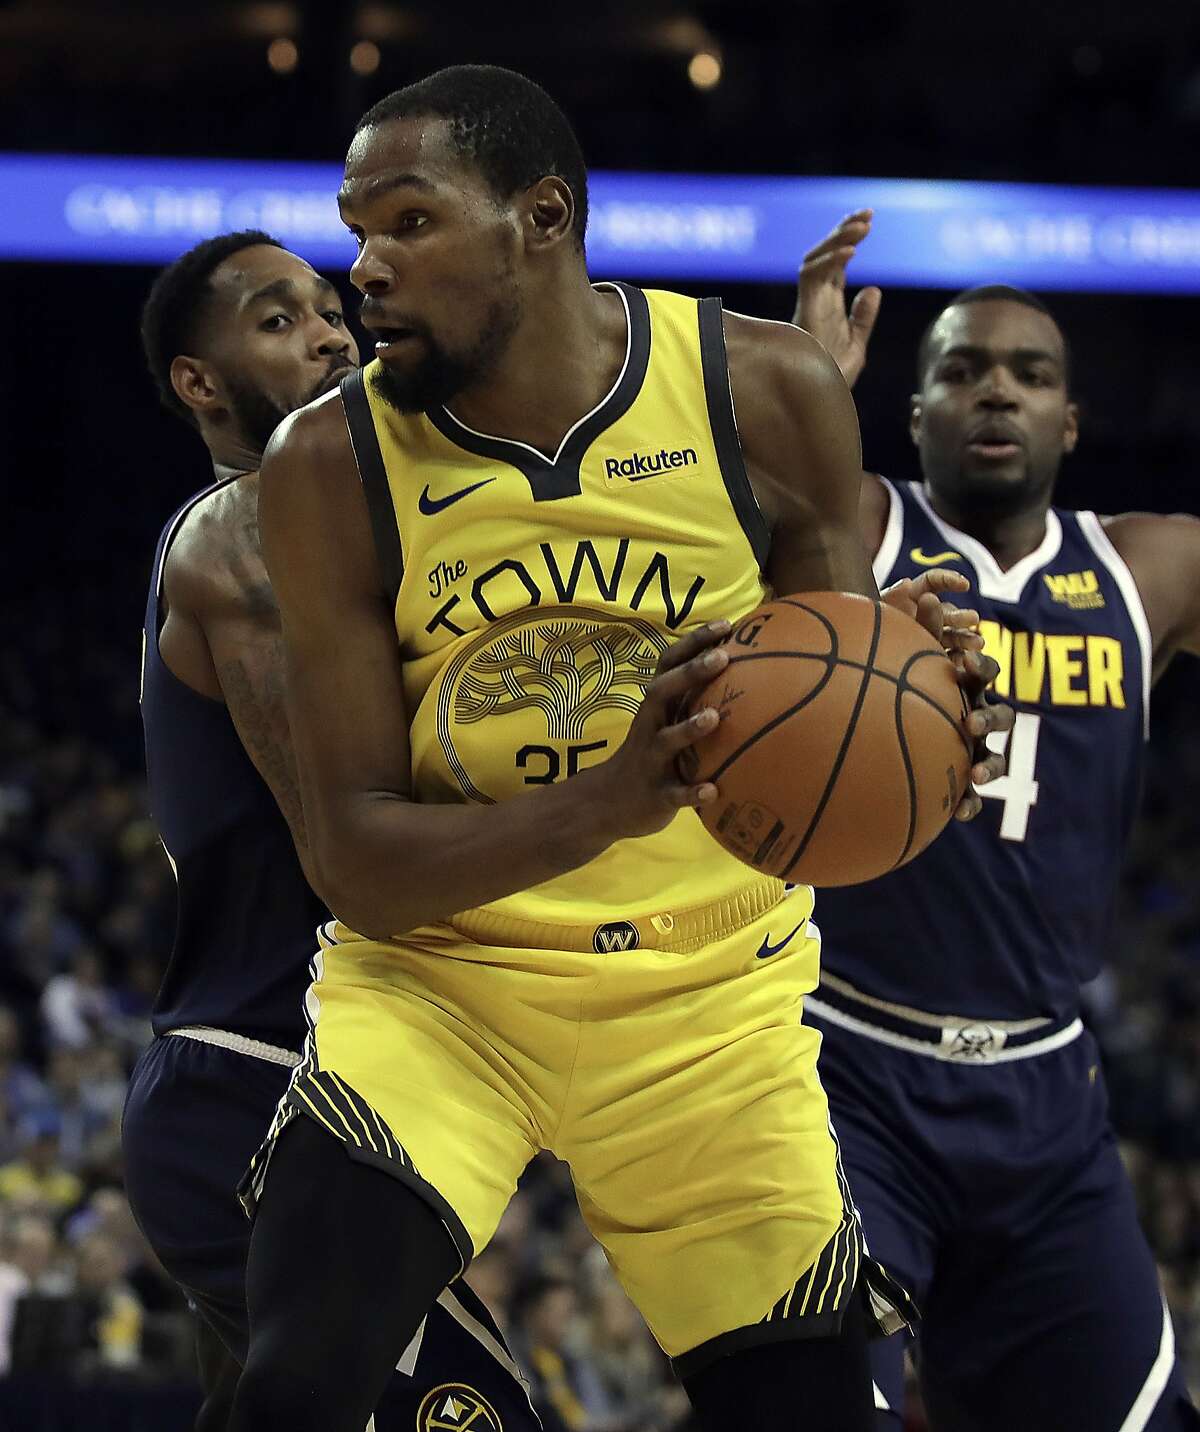 Golden State Warriors' Kevin Durant, center, looks to pass the ball away from Denver Nuggets' Will Barton, left, and Paul Millsap (4) during the second half of an NBA basketball game Friday, March 8, 2019, in Oakland, Calif. (AP Photo/Ben Margot)